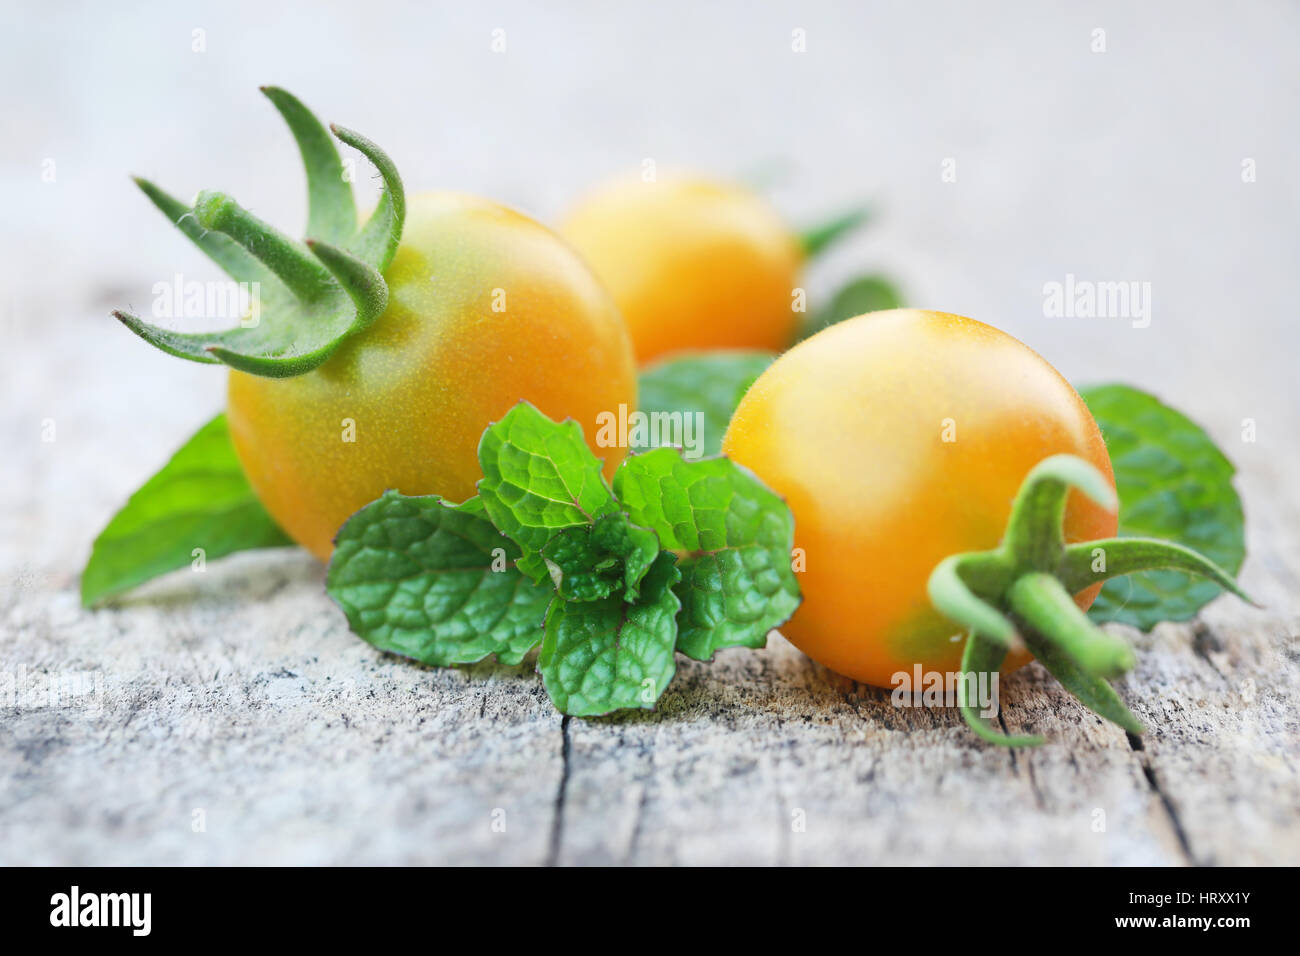 Fresh organic tomatoes with mint leaves on wooden surface Stock Photo